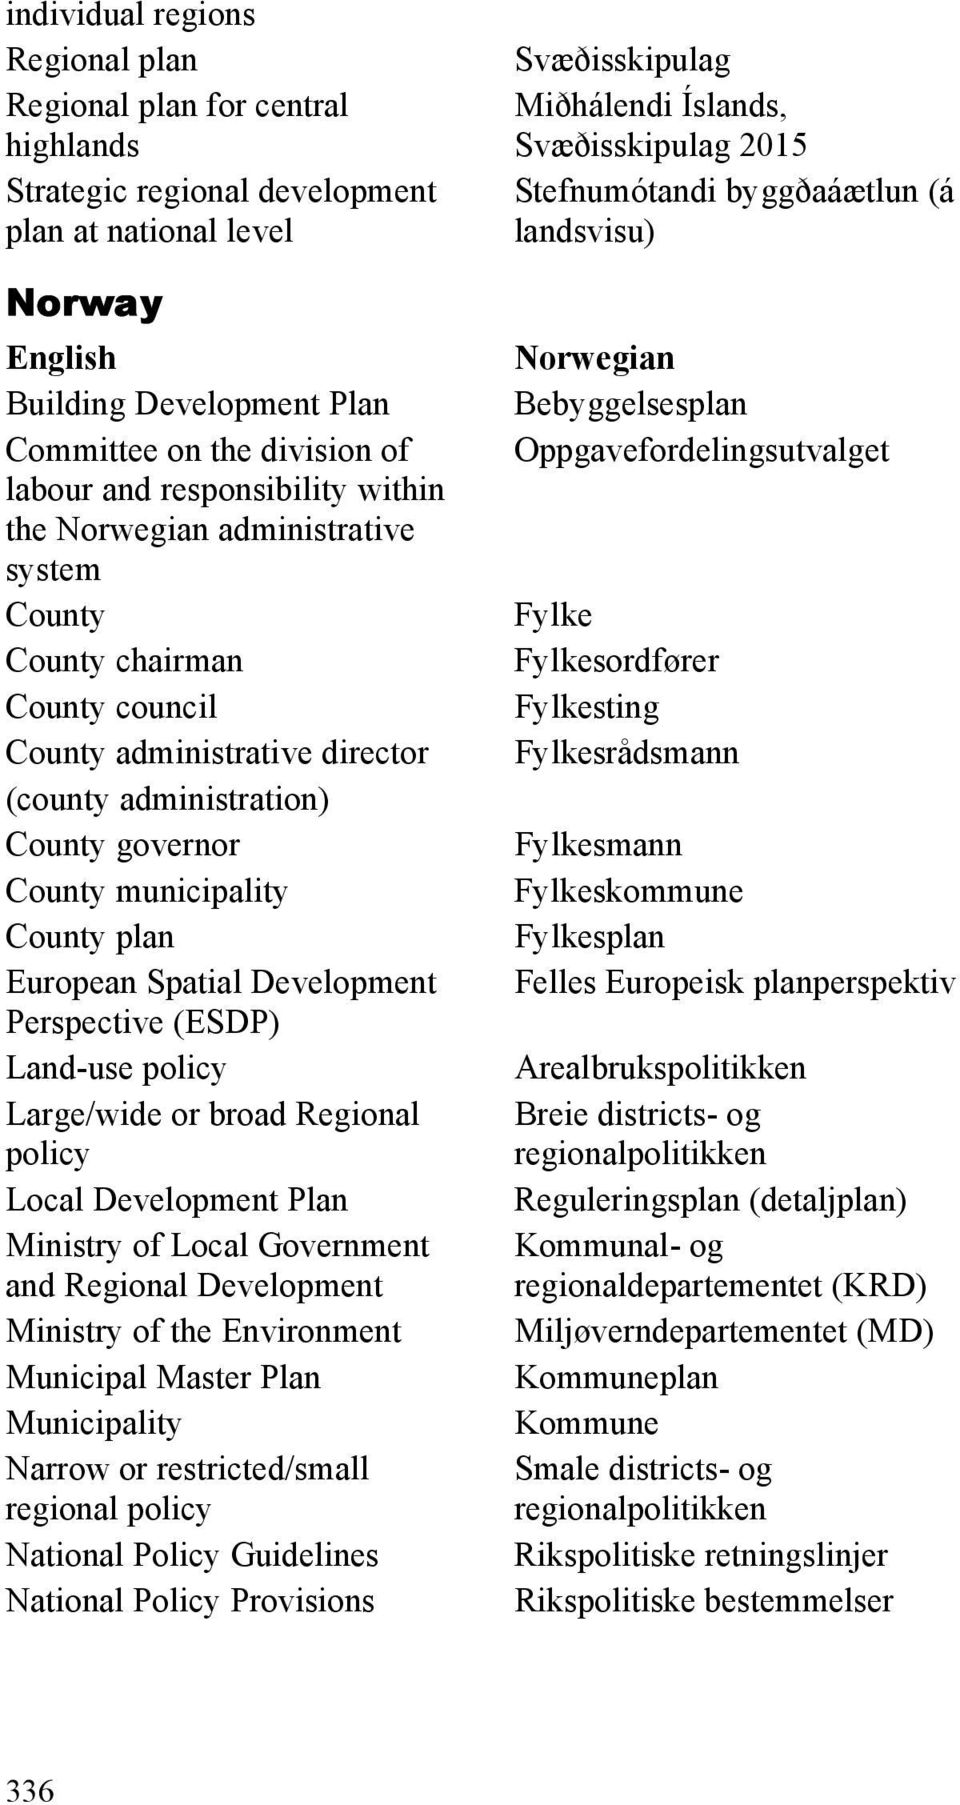 European Spatial Development Perspective (ESDP) Land-use policy Large/wide or broad al policy Local Development Plan Ministry of Local Government and al Development Ministry of the Environment